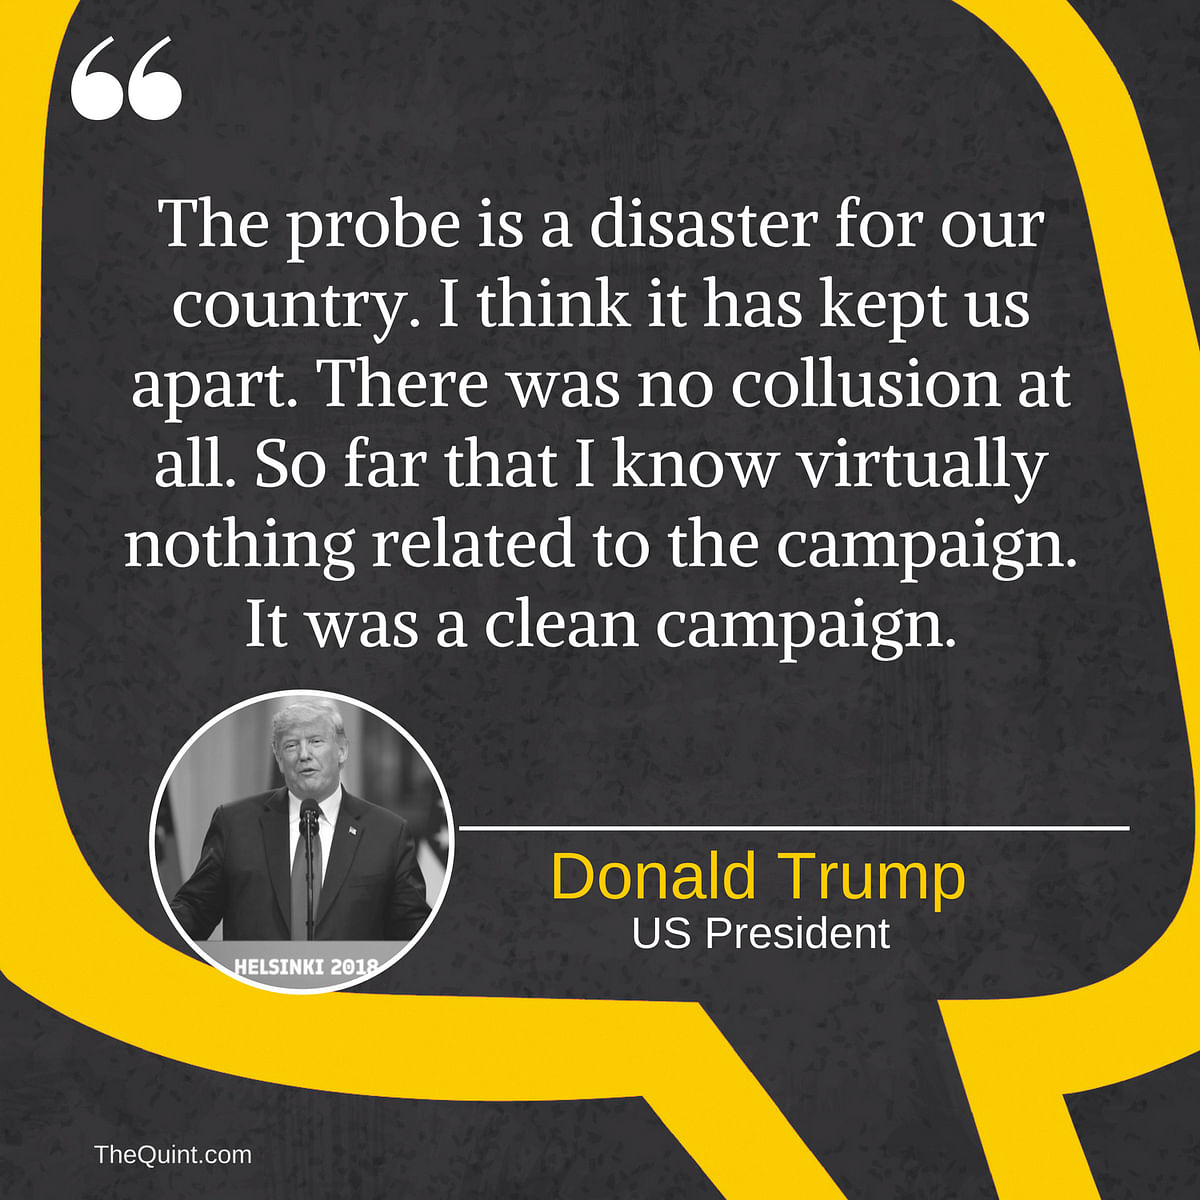 Donald Trump said that the probe was a disaster for the US & that there was no collusion during the 2016 elections.